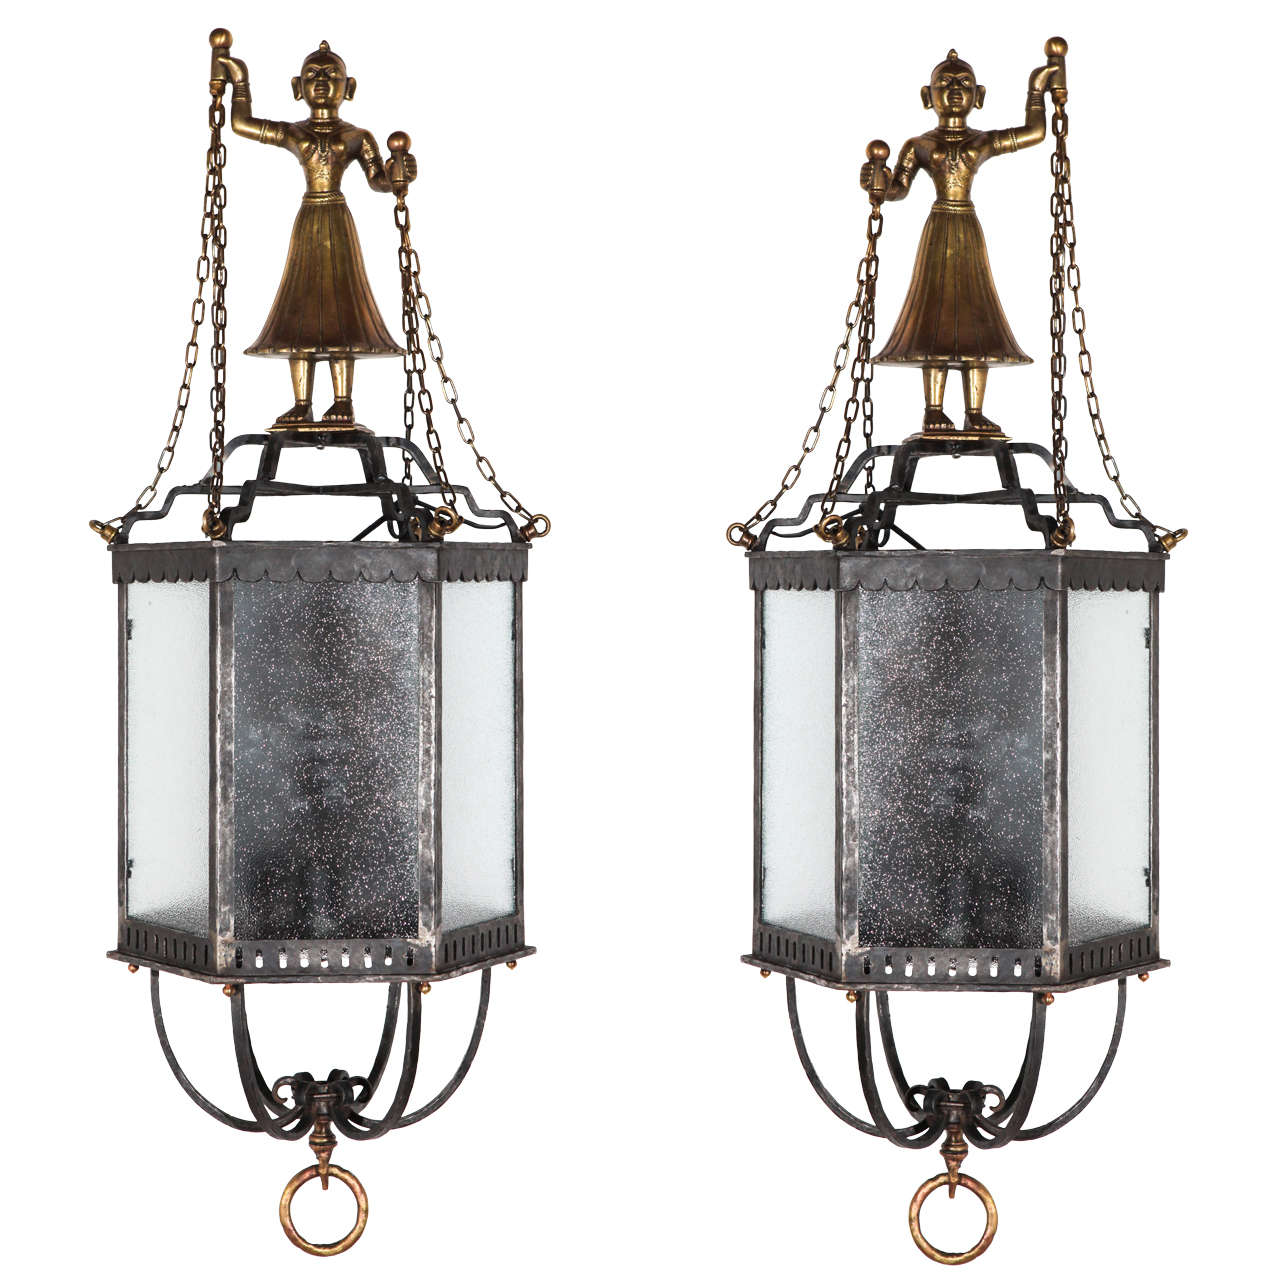 Pair of Fantastic Figural Carriage Lanterns For Sale